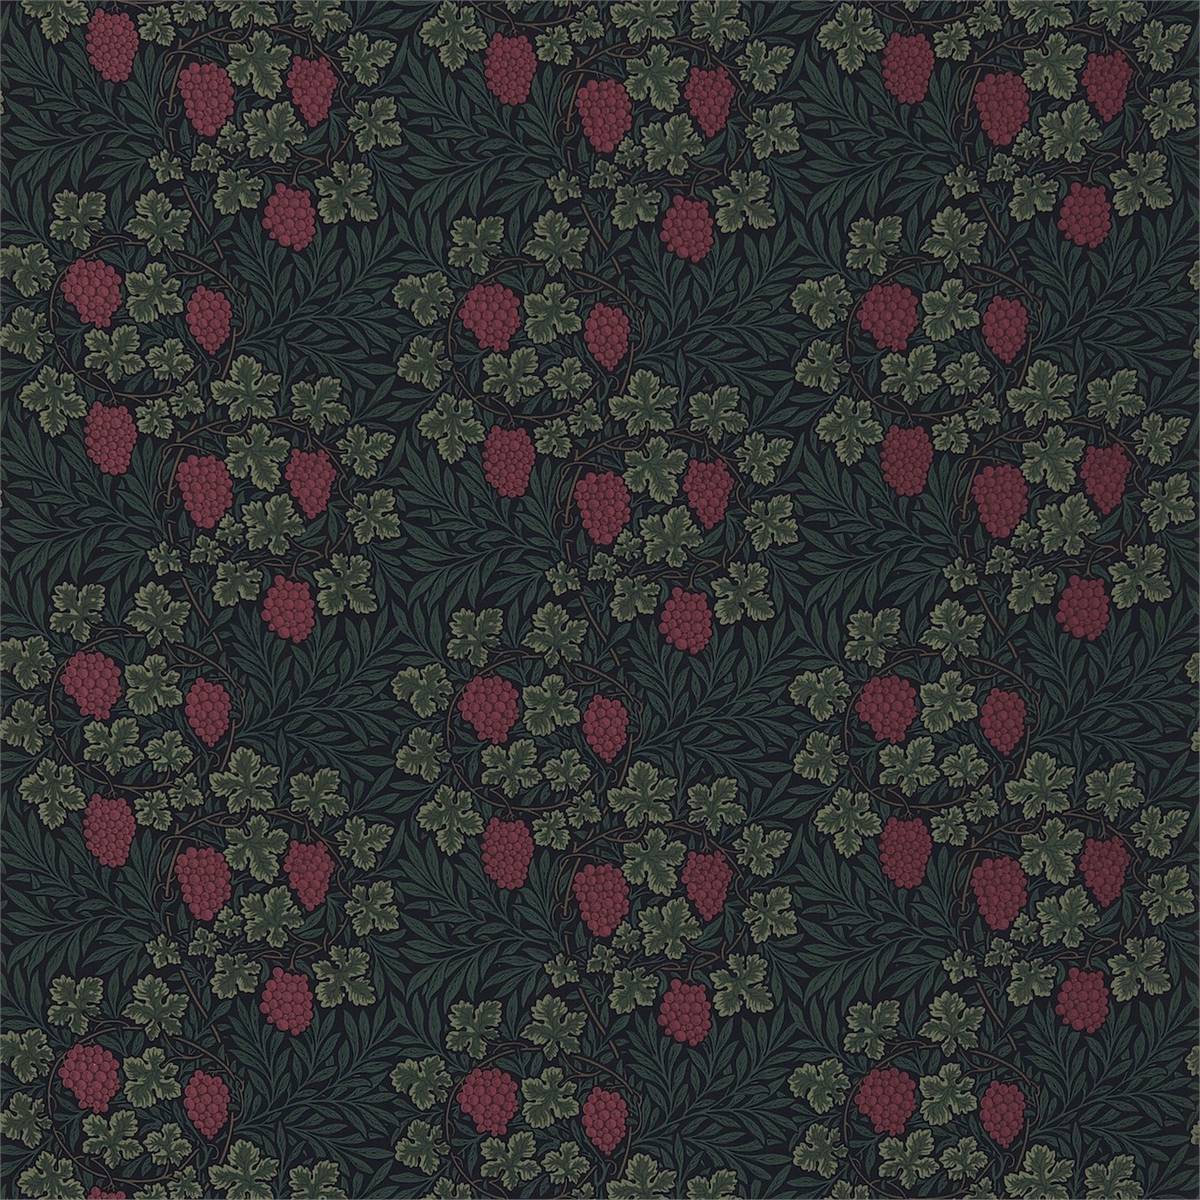 Vine Floral And Botanical Fabric by William Morris & Co.